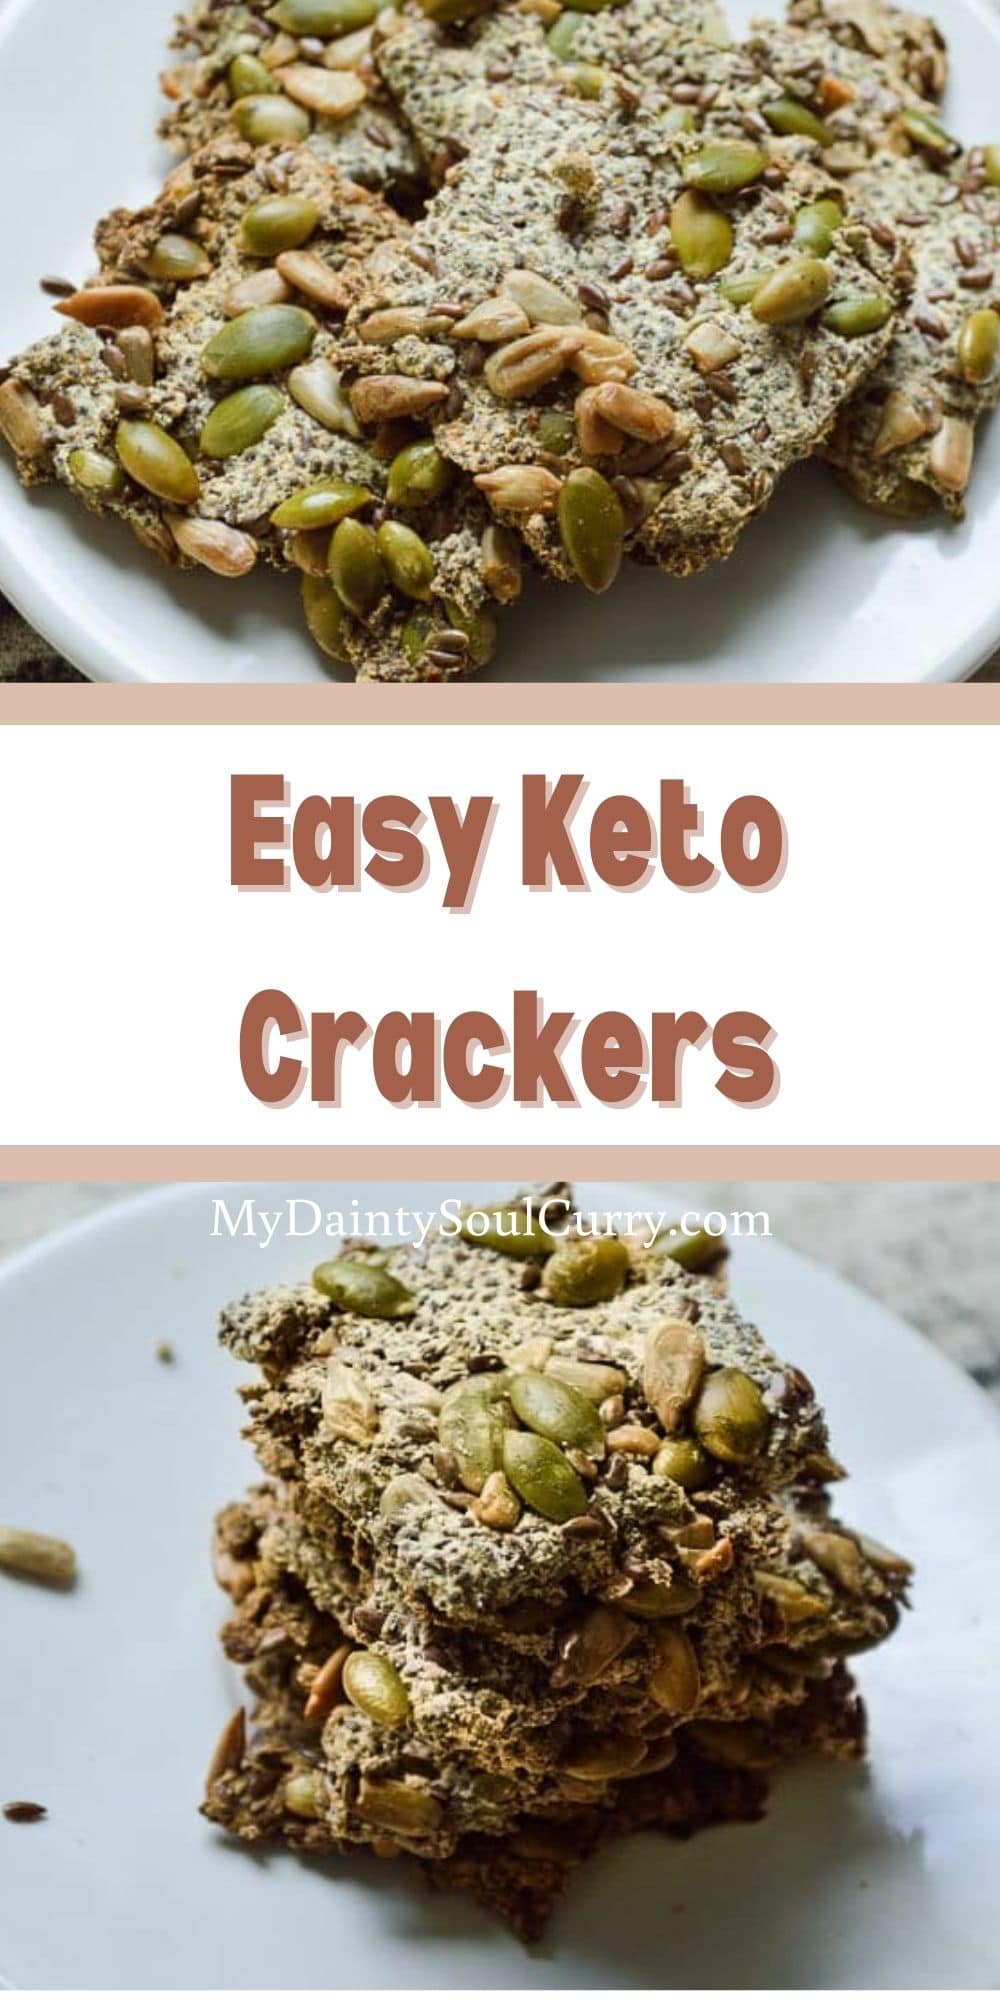 Easy Keto Crackers - My Dainty Soul Curry